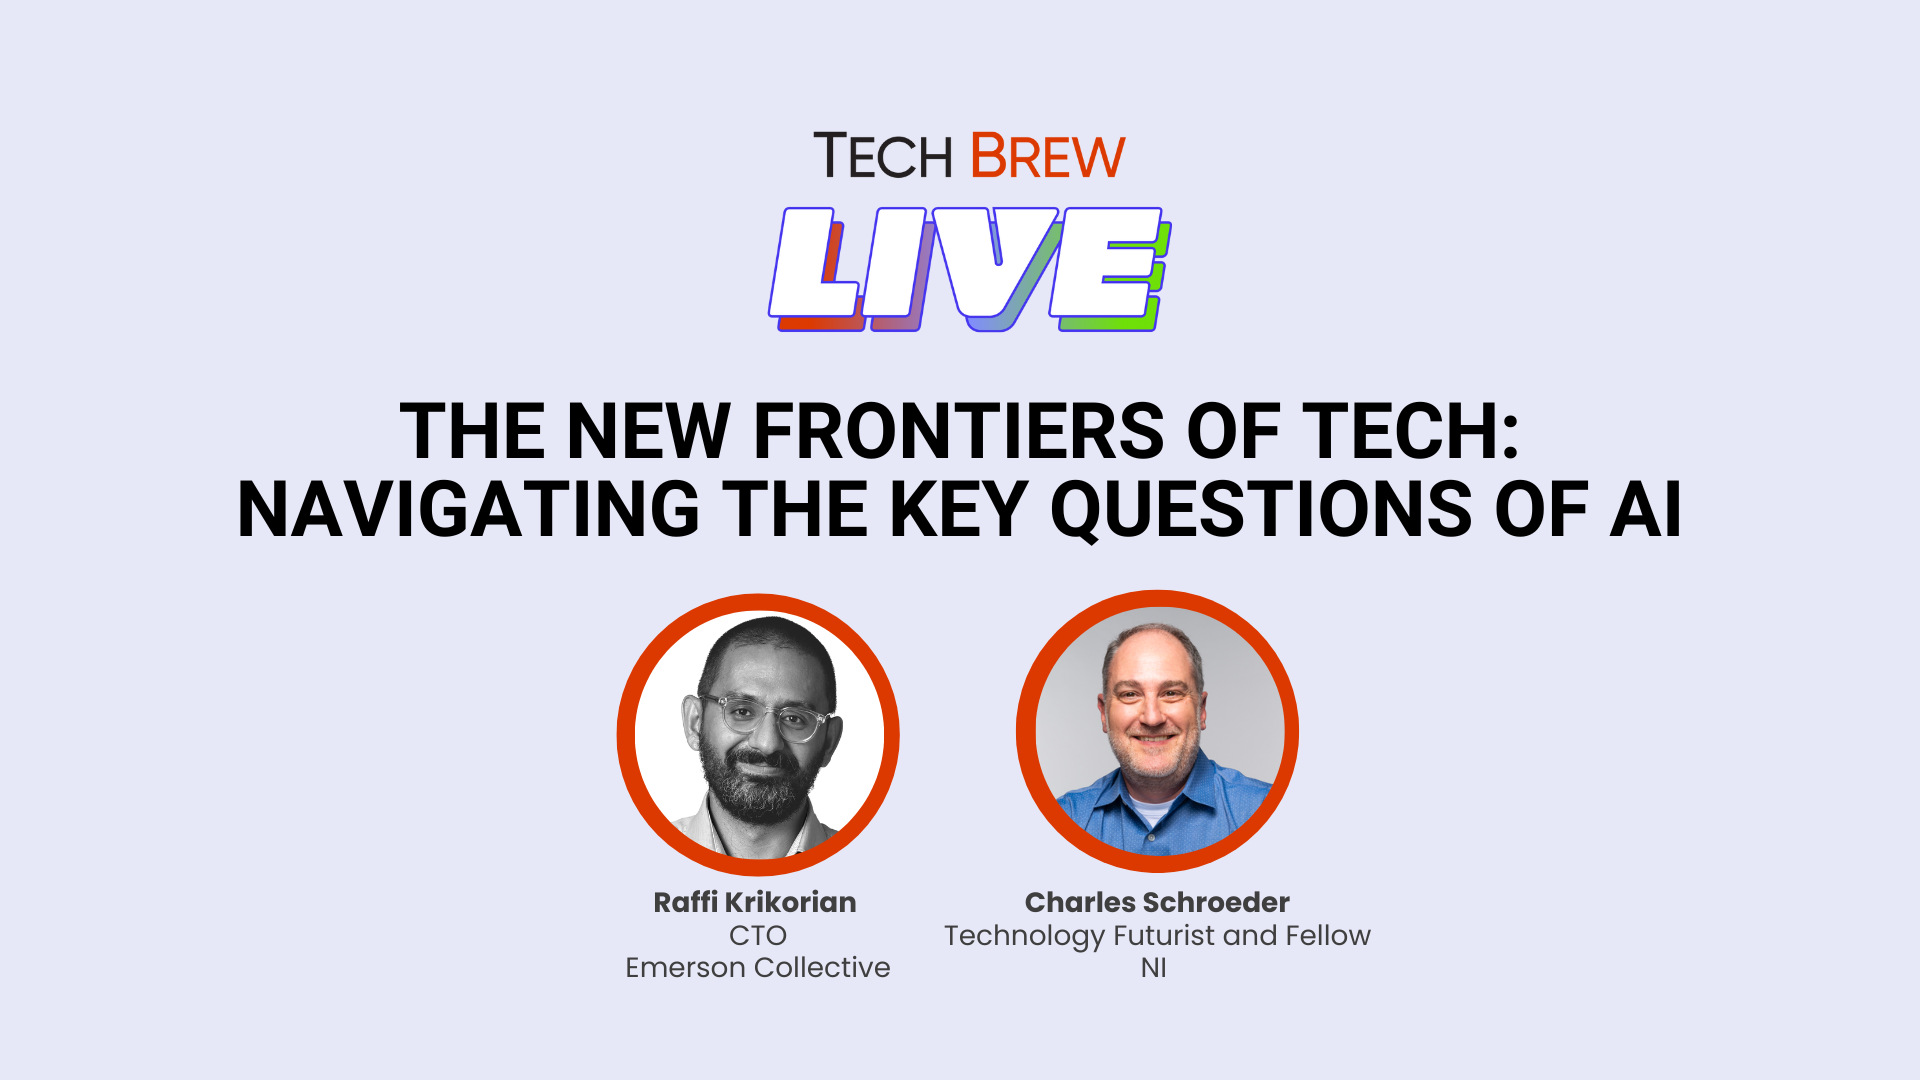 Tech Brew Live logo with "The New Frontiers of Tech: Navigating the Key Questions of AI" text above two speaker headshots